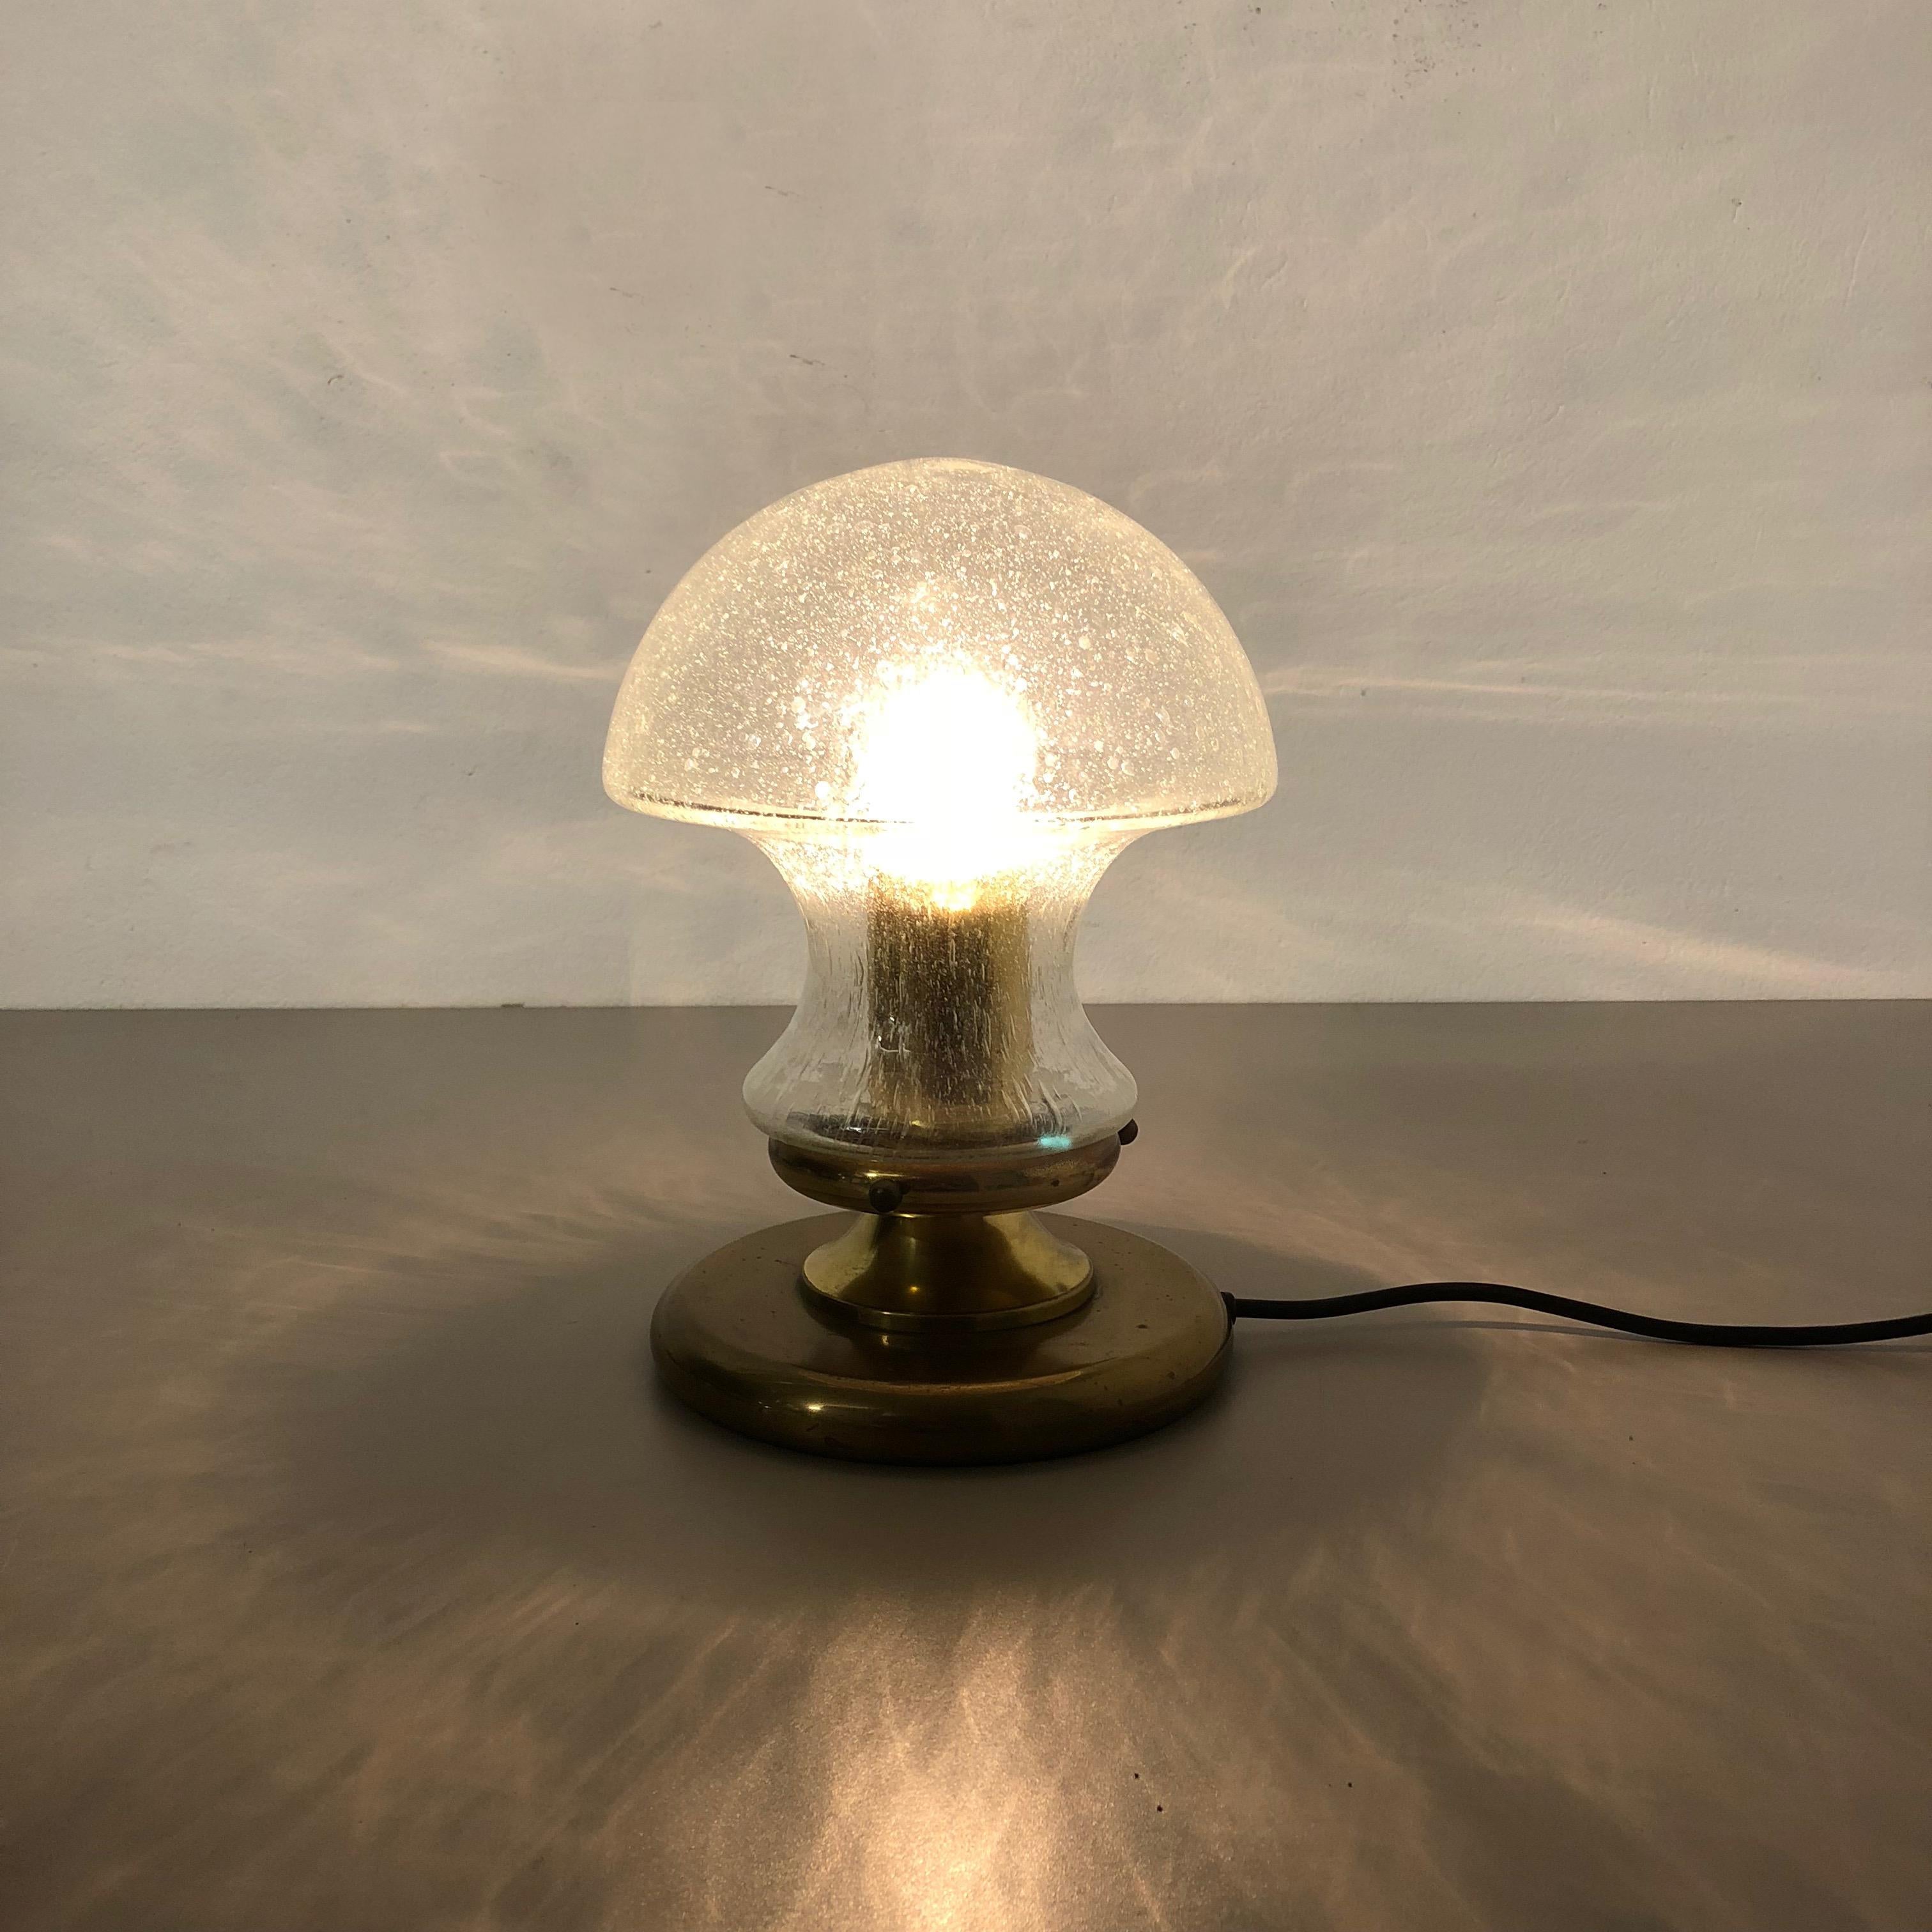 Modernist Glass and Brass Mushroom Table Light by Doria Lights, 1970s, Germany For Sale 9